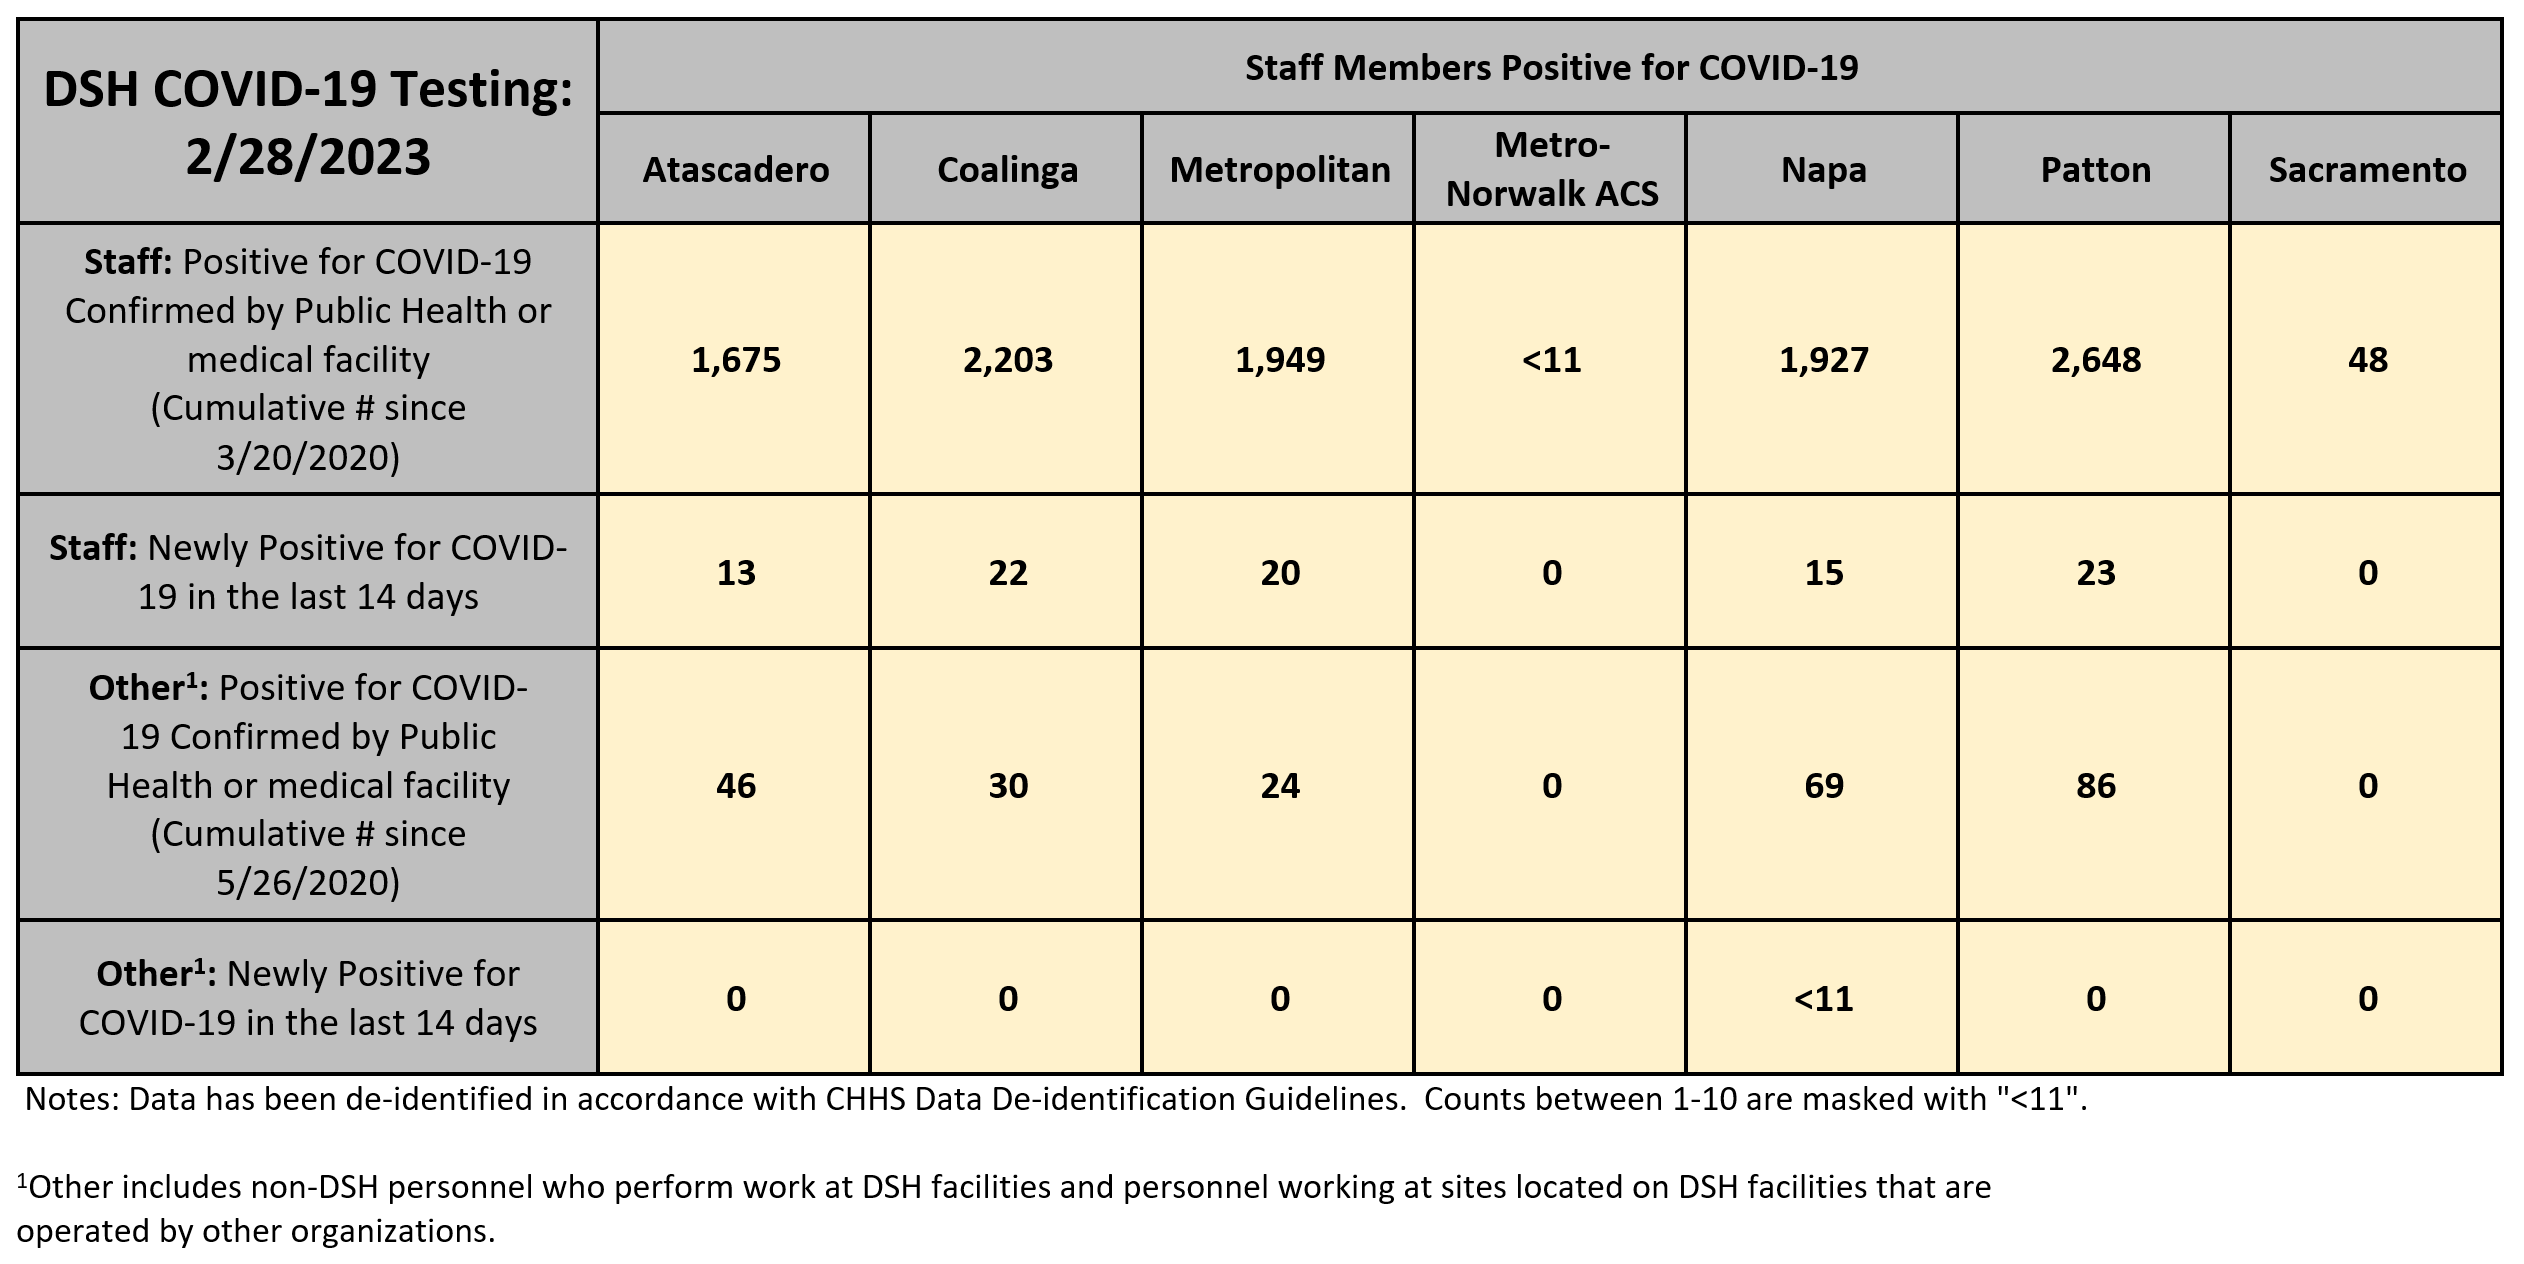 DSH COVID-19 Testing: As of 2/28/2023 � Staff Members Positive for COVID-19 - First Row: Staff: Positive for COVID-19 Confirmed by Public Health or medical facility (Cumulative Number since 3/20/2020): Atascadero: 1,675, Coalinga: 2,203, Metropolitan: 1,949, Metro-Norwalk ACS: Less than 11, Napa: 1,927, Patton: 2,648, Sacramento: 48 � Next Row: Staff: Newly Positive for COVID-19 in the last 14 days: Atascadero: 13, Coalinga: 22, Metropolitan: 20, Metro-Norwalk ACS: 0, Napa: 15, Patton: 23, Sacramento: 0 � Next Row: Other: Positive for COVID-19 Confirmed by Public Health or medical facility (Cumulative Number since 5/26/2020)(Other includes non-DSH personnel who perform work at DSH facilities and personnel working at sites located on DSH facilities that are operated by other organizations). Atascadero: 46, Coalinga: 30, Metropolitan: 24, Metro-Norwalk ACS: 0, Napa: 69, Patton: 86, Sacramento: 0 � Next Row: Other: Newly Positive for COVID-19 in the last 14 days: Atascadero: 0, Coalinga: 0, Metropolitan: 0, Metro-Norwalk ACS: 0, Napa: Less than 11, Patton: 0, Sacramento: 0